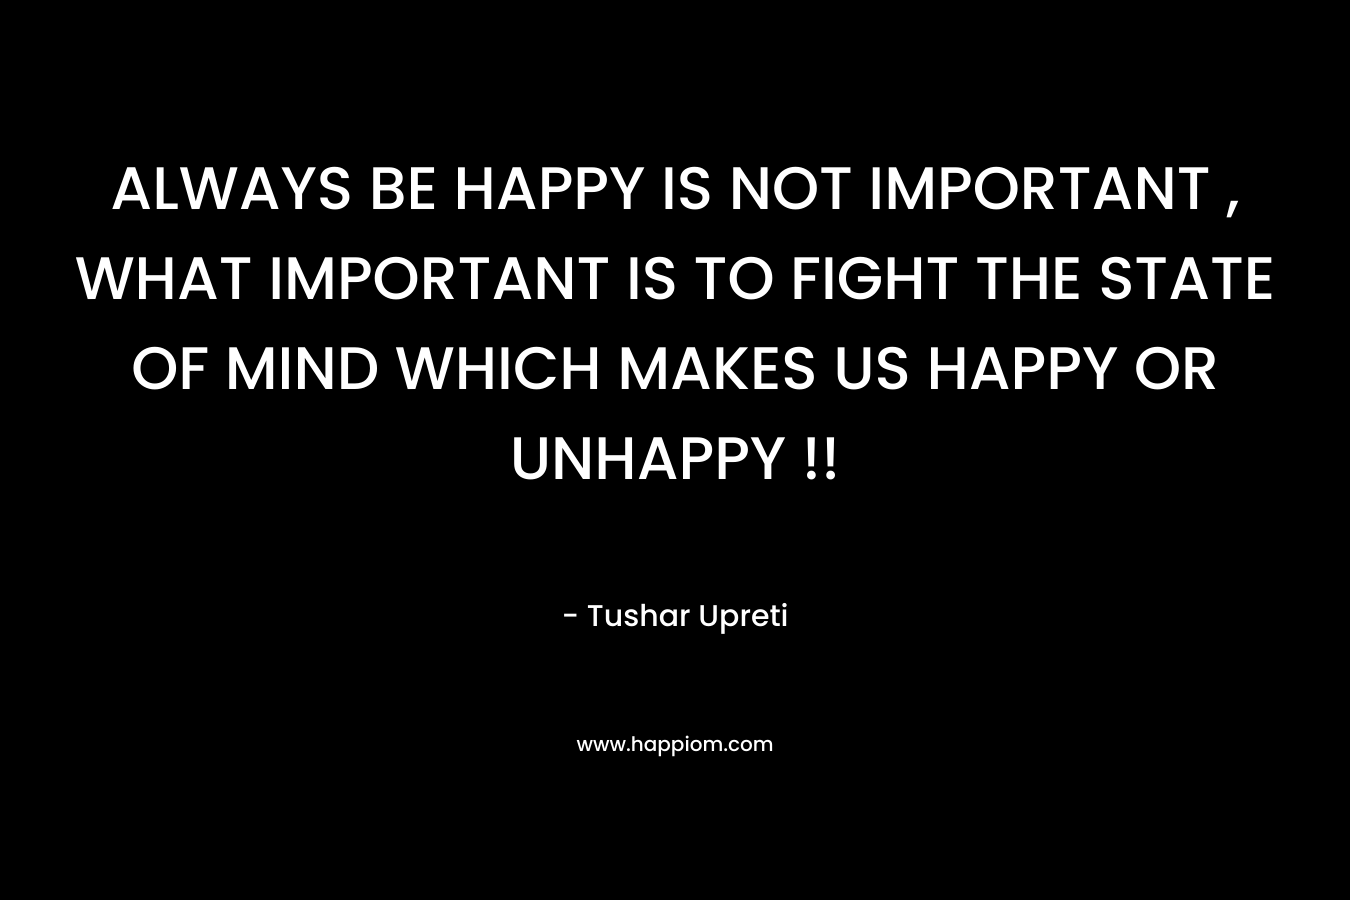 ALWAYS BE HAPPY IS NOT IMPORTANT , WHAT IMPORTANT IS TO FIGHT THE STATE OF MIND WHICH MAKES US HAPPY OR UNHAPPY !!